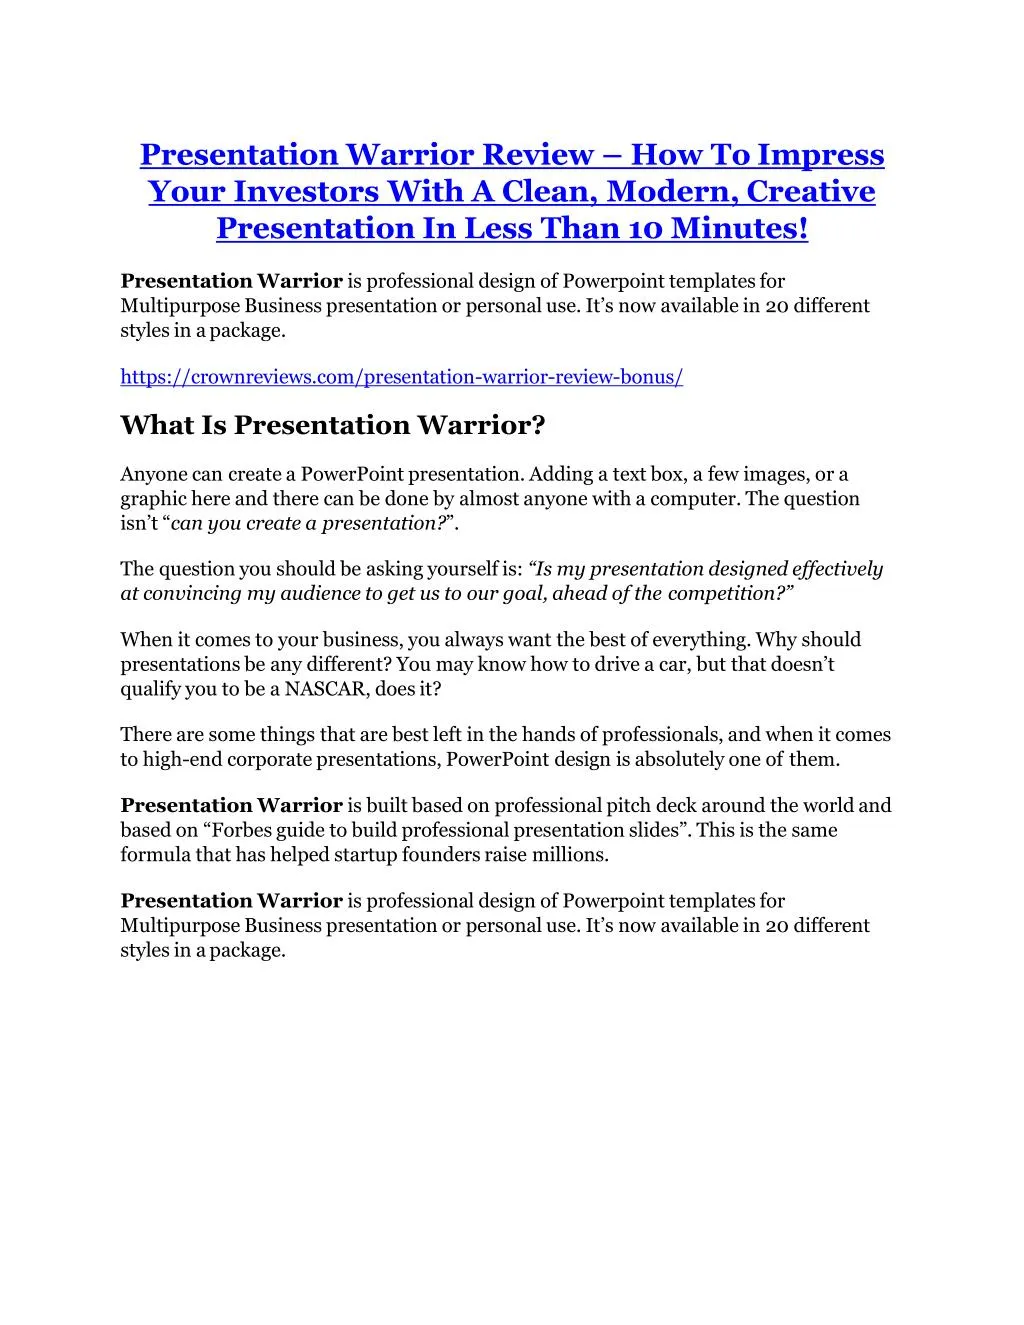 presentation warrior review how to impress your